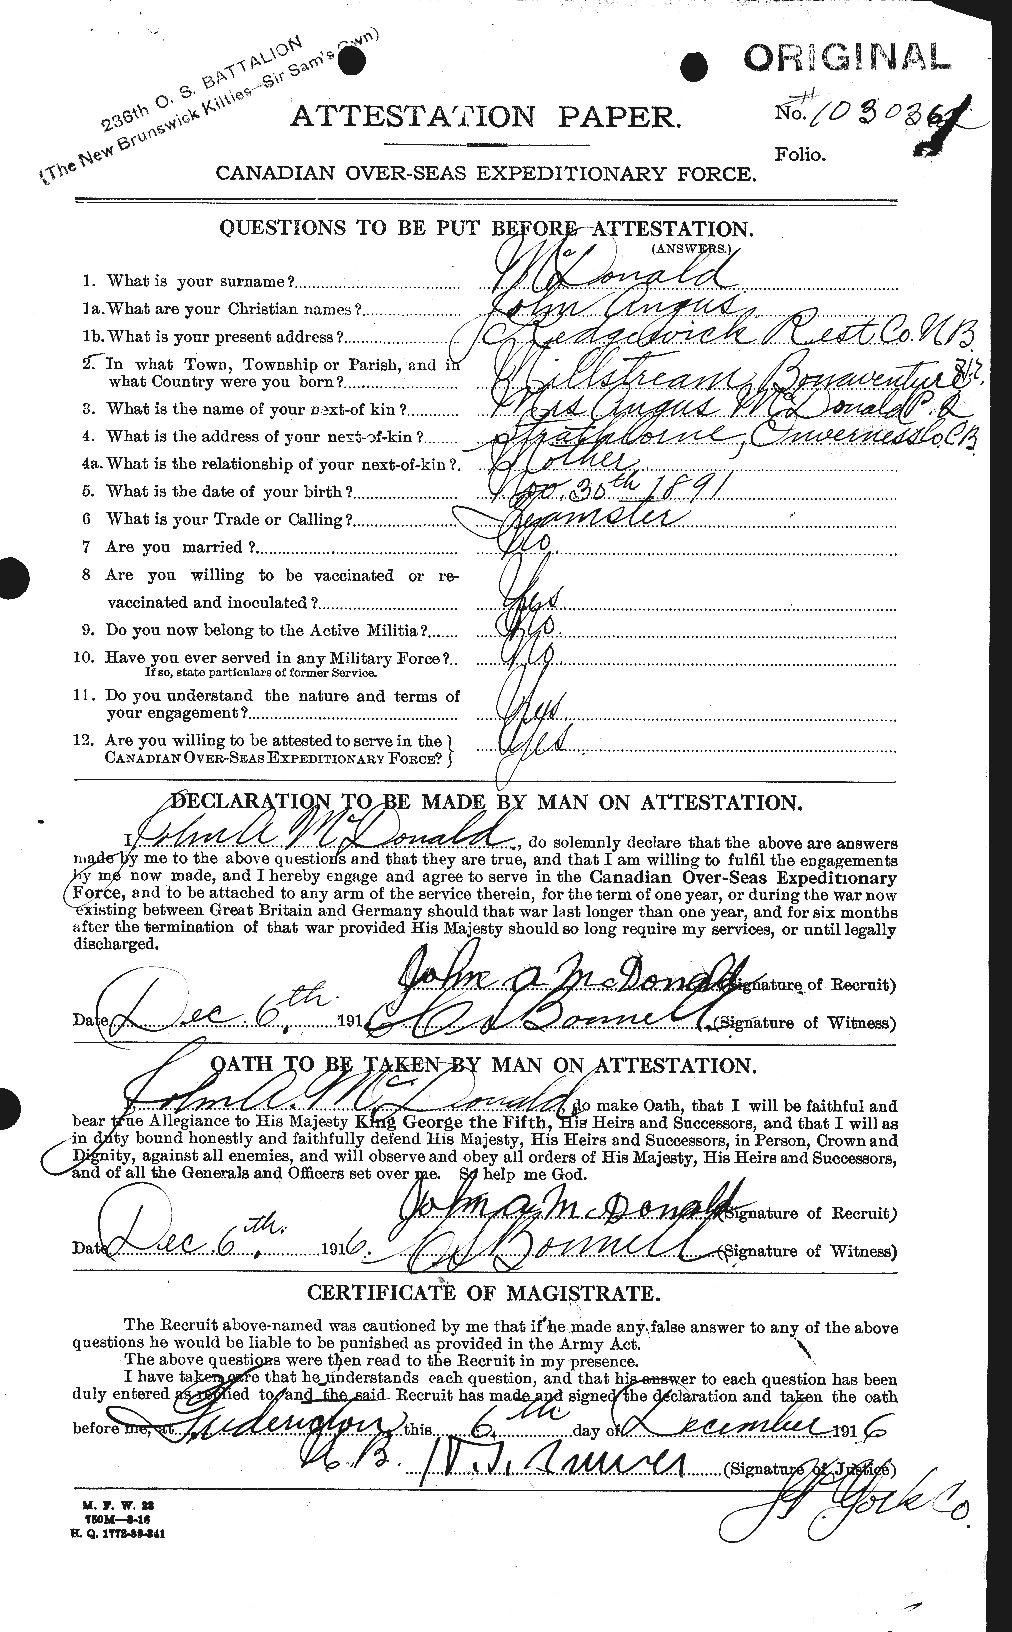 Personnel Records of the First World War - CEF 516547a